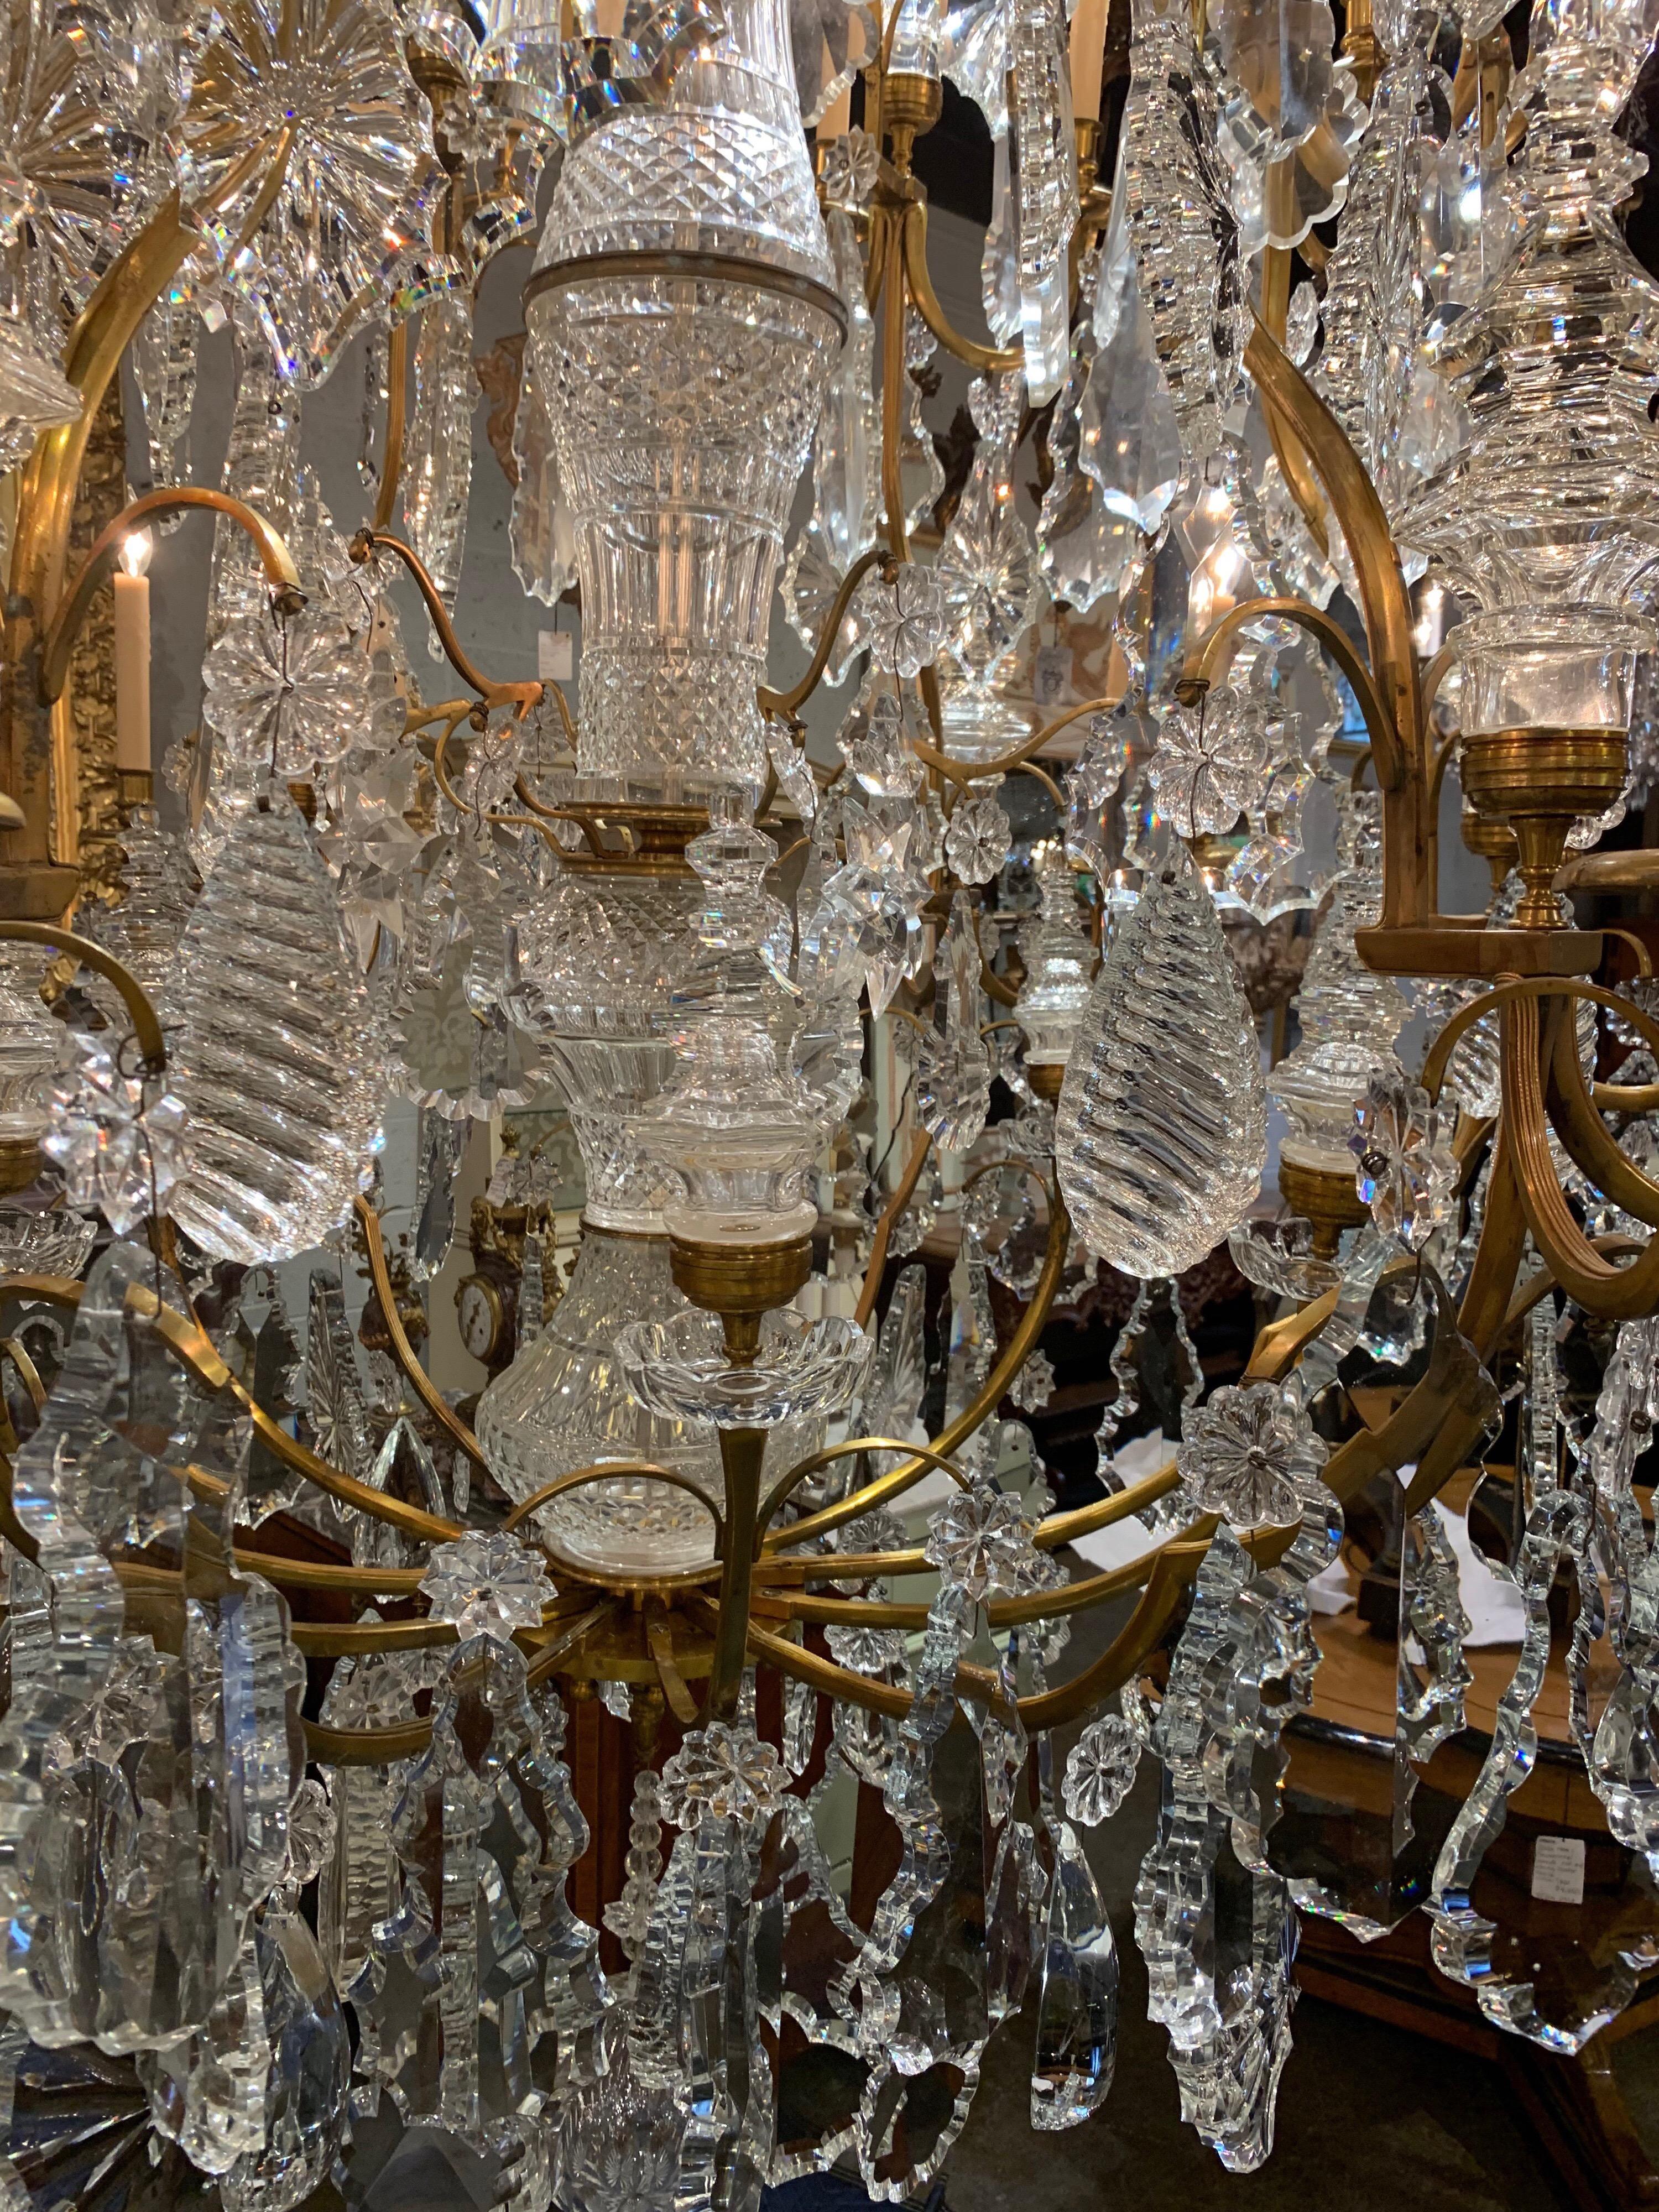 Magnificent pair of palace size Baccarat style crystal and bronze chandeliers. Each has 24 lights and a plethora beautiful glistening crystals. Pictures do not due these justice.   Absolutely stunning and exceptional quality.   